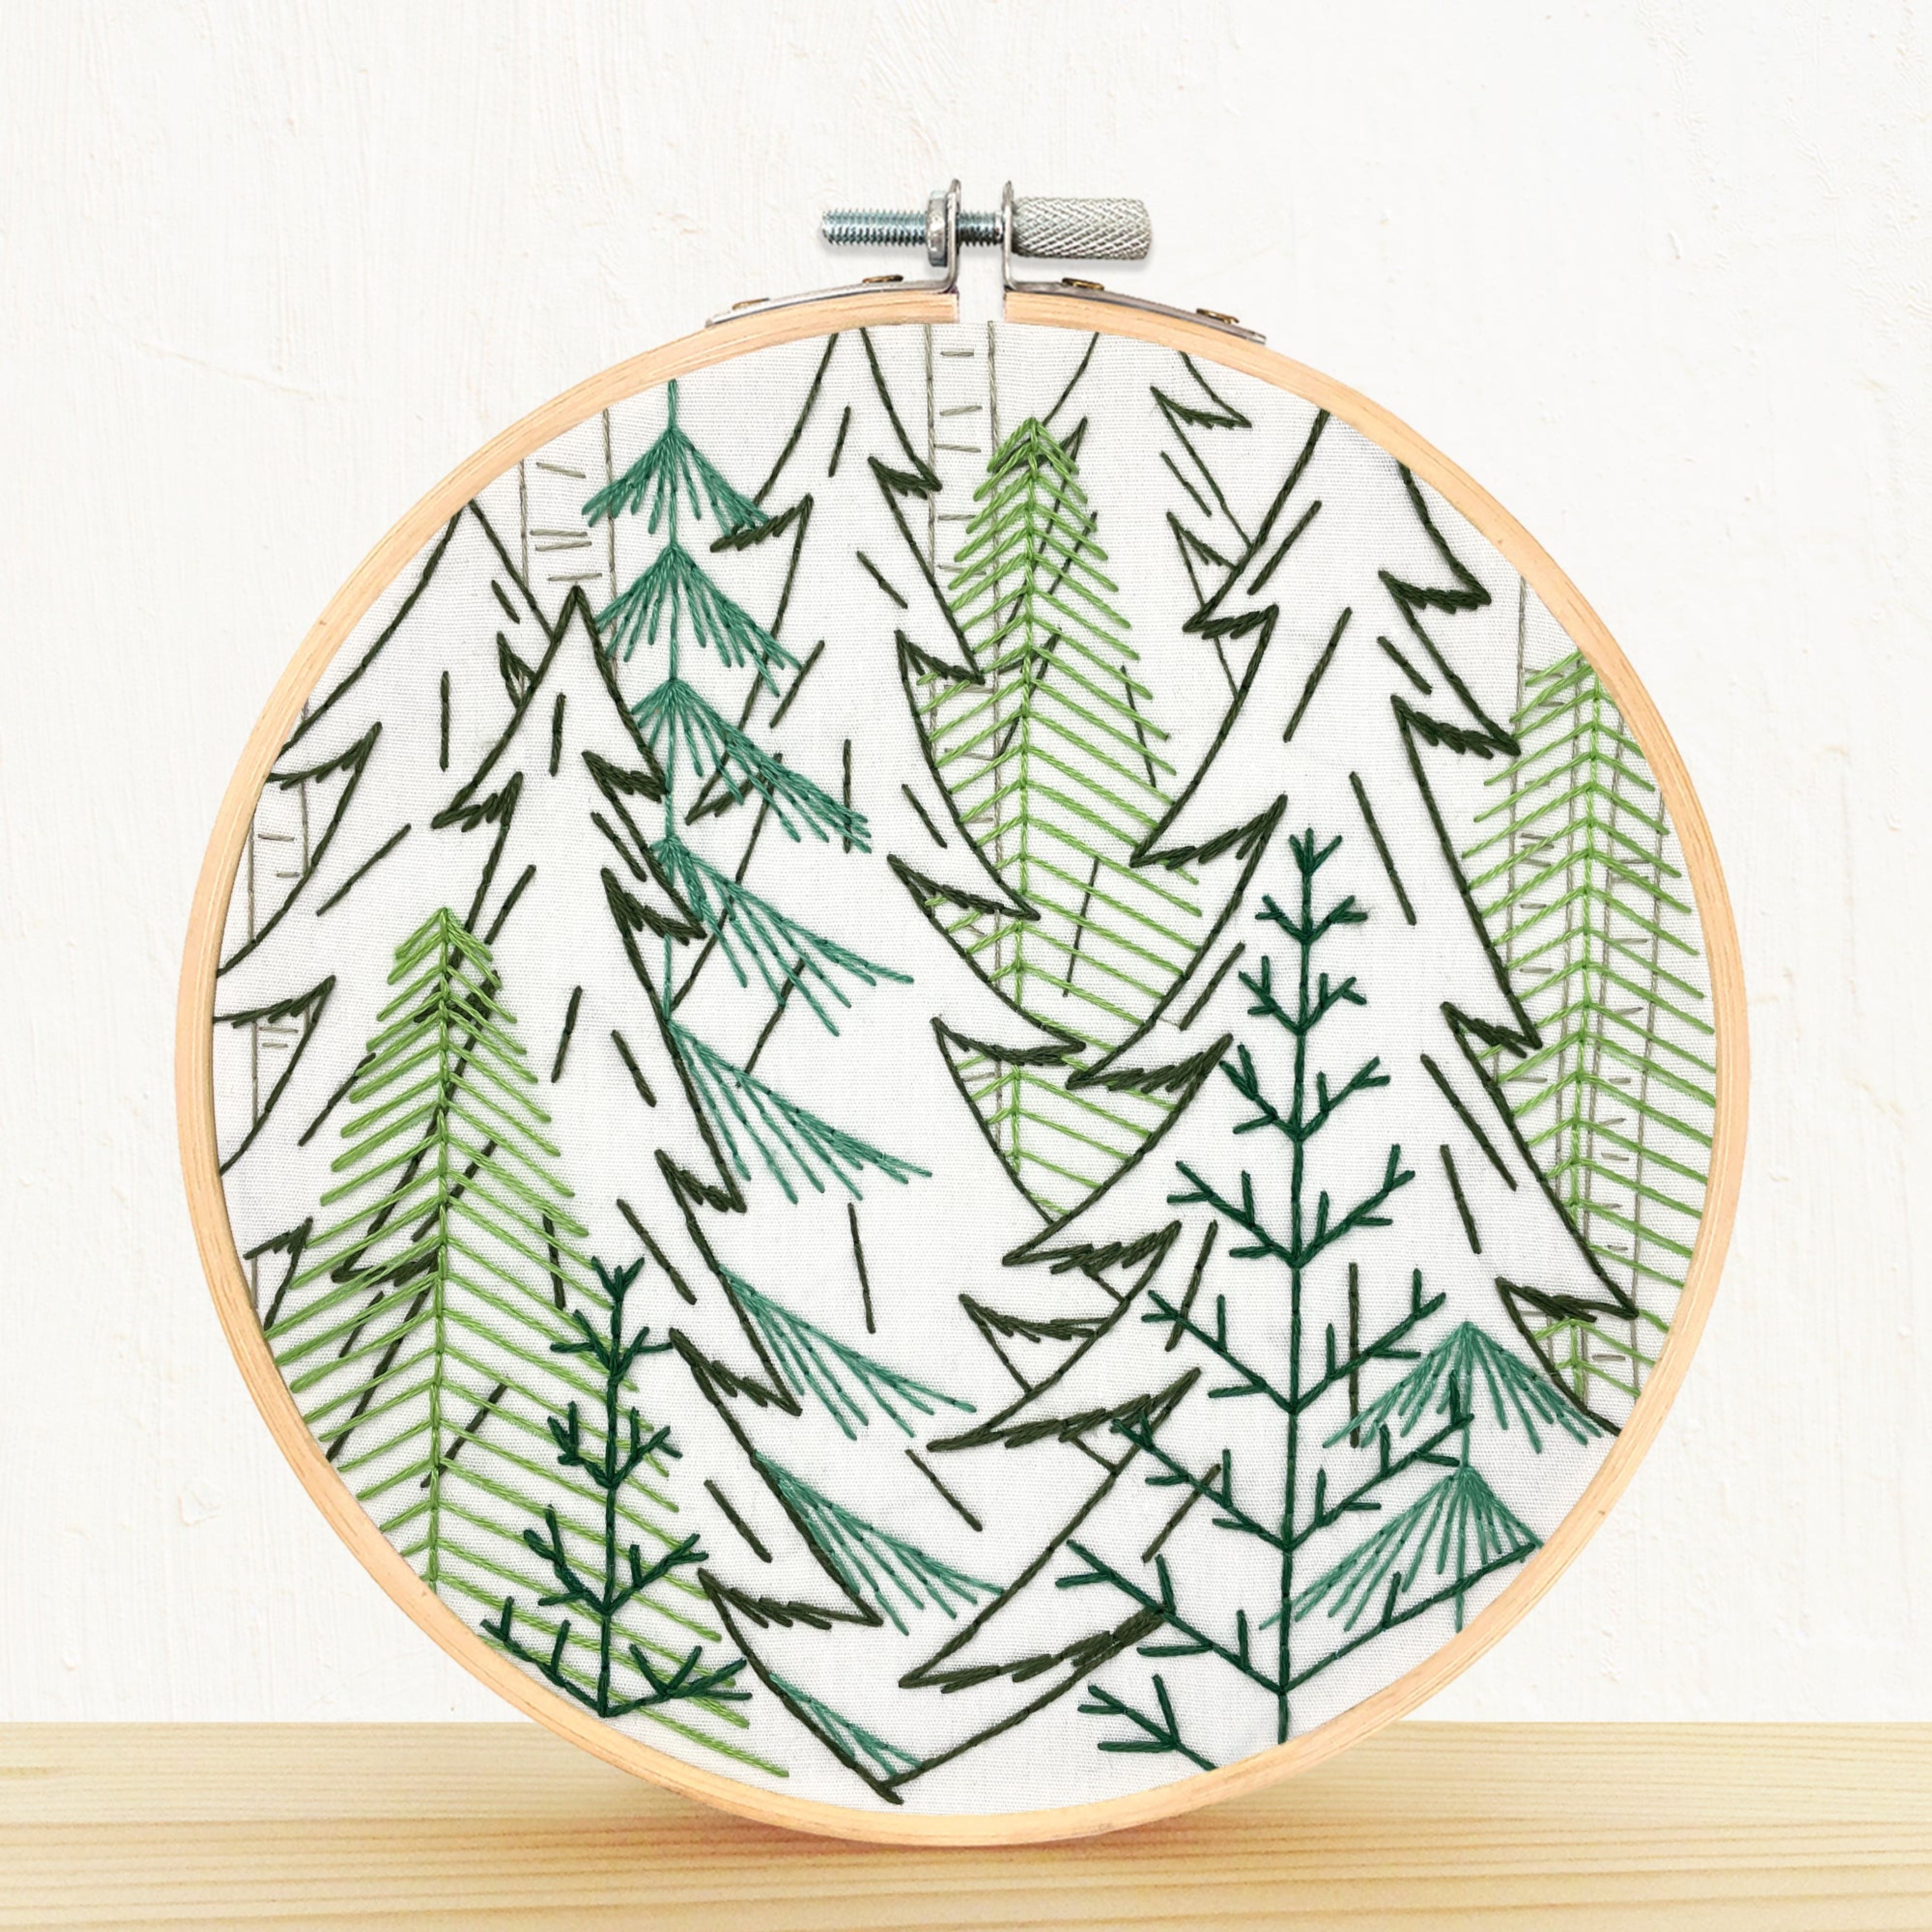 Into The Woods - embroidery kit